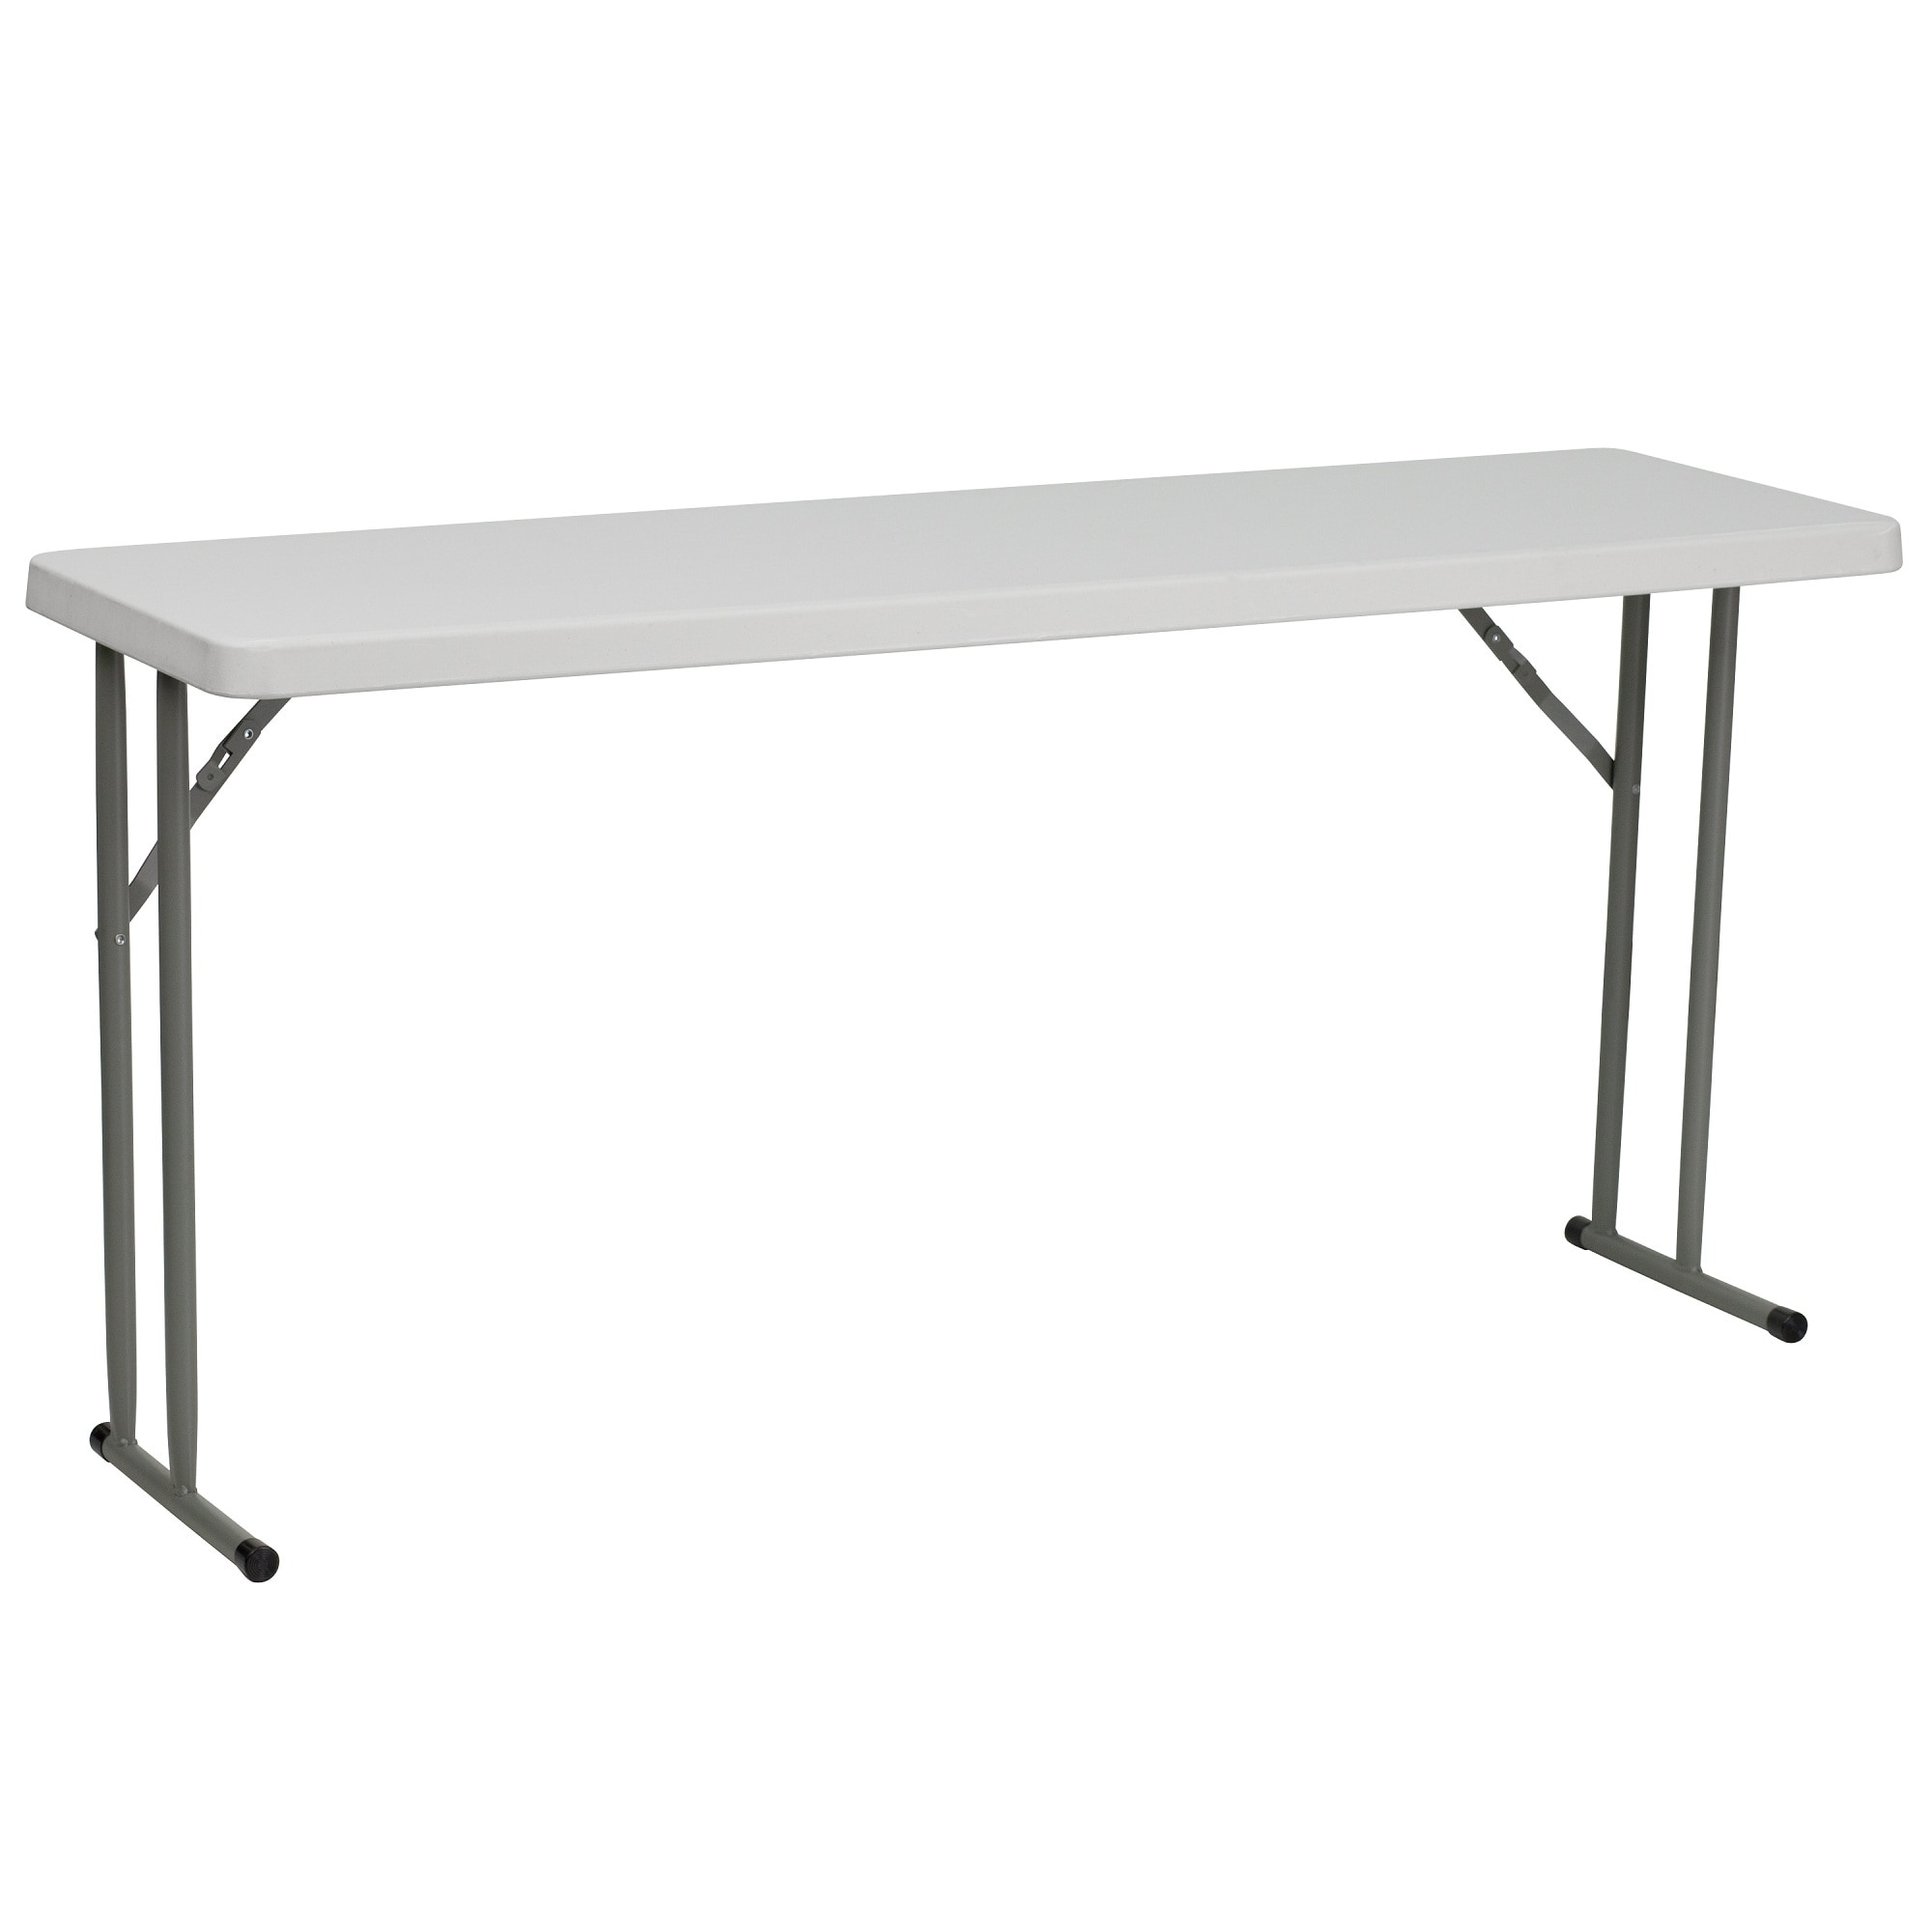 60" White and Gray Contemporary Rectangular Folding Table